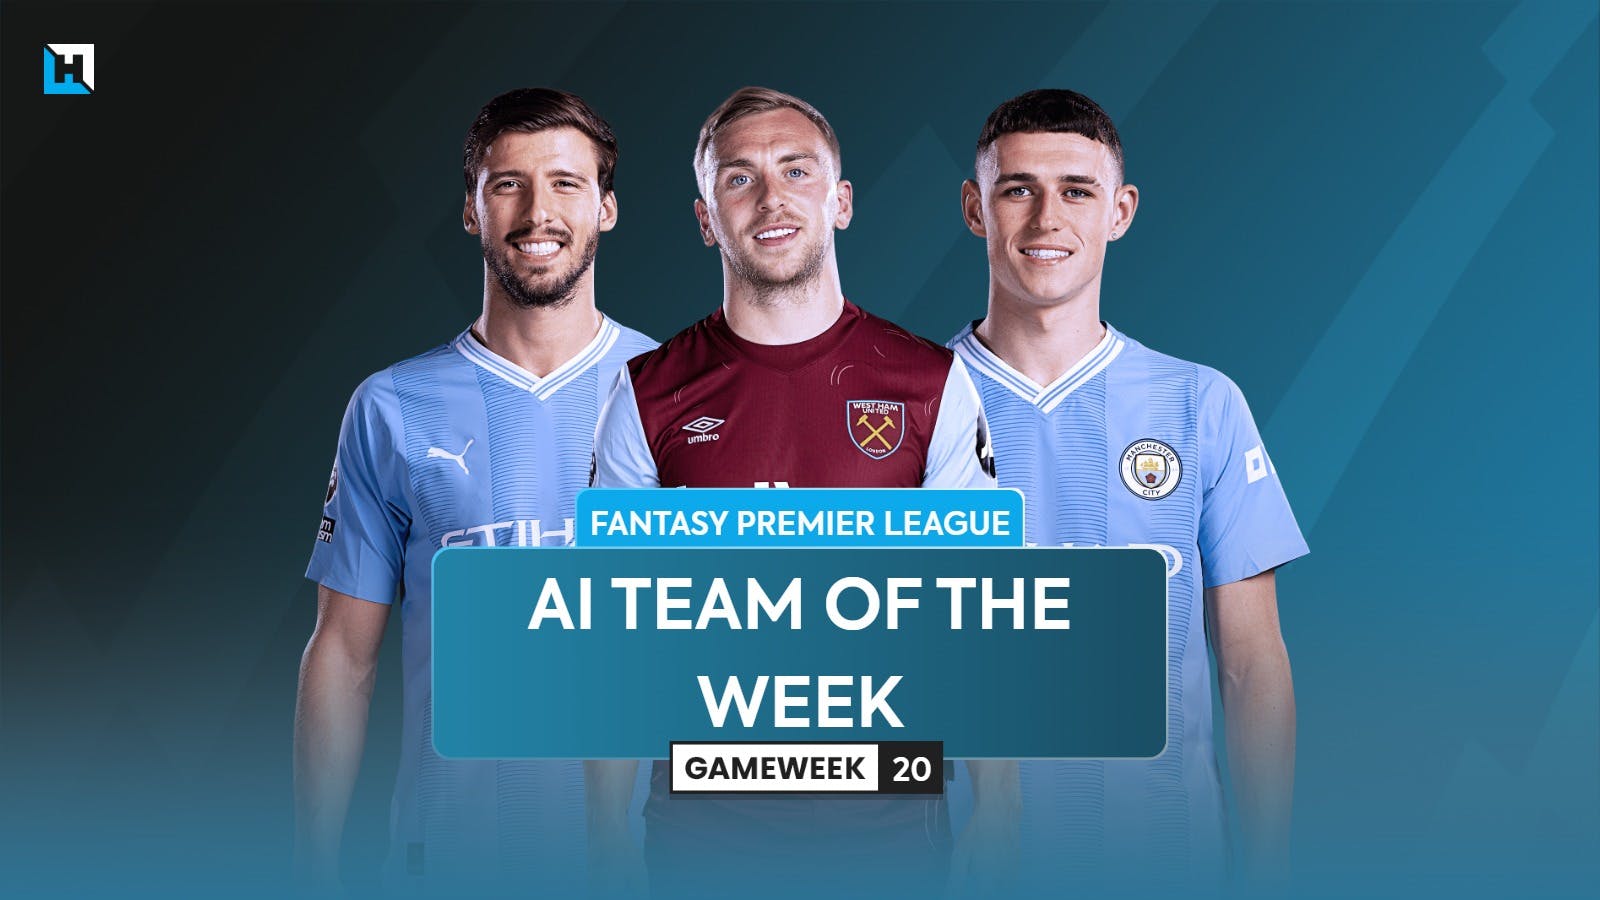 The best FPL team for Gameweek 20 according to Hub AI